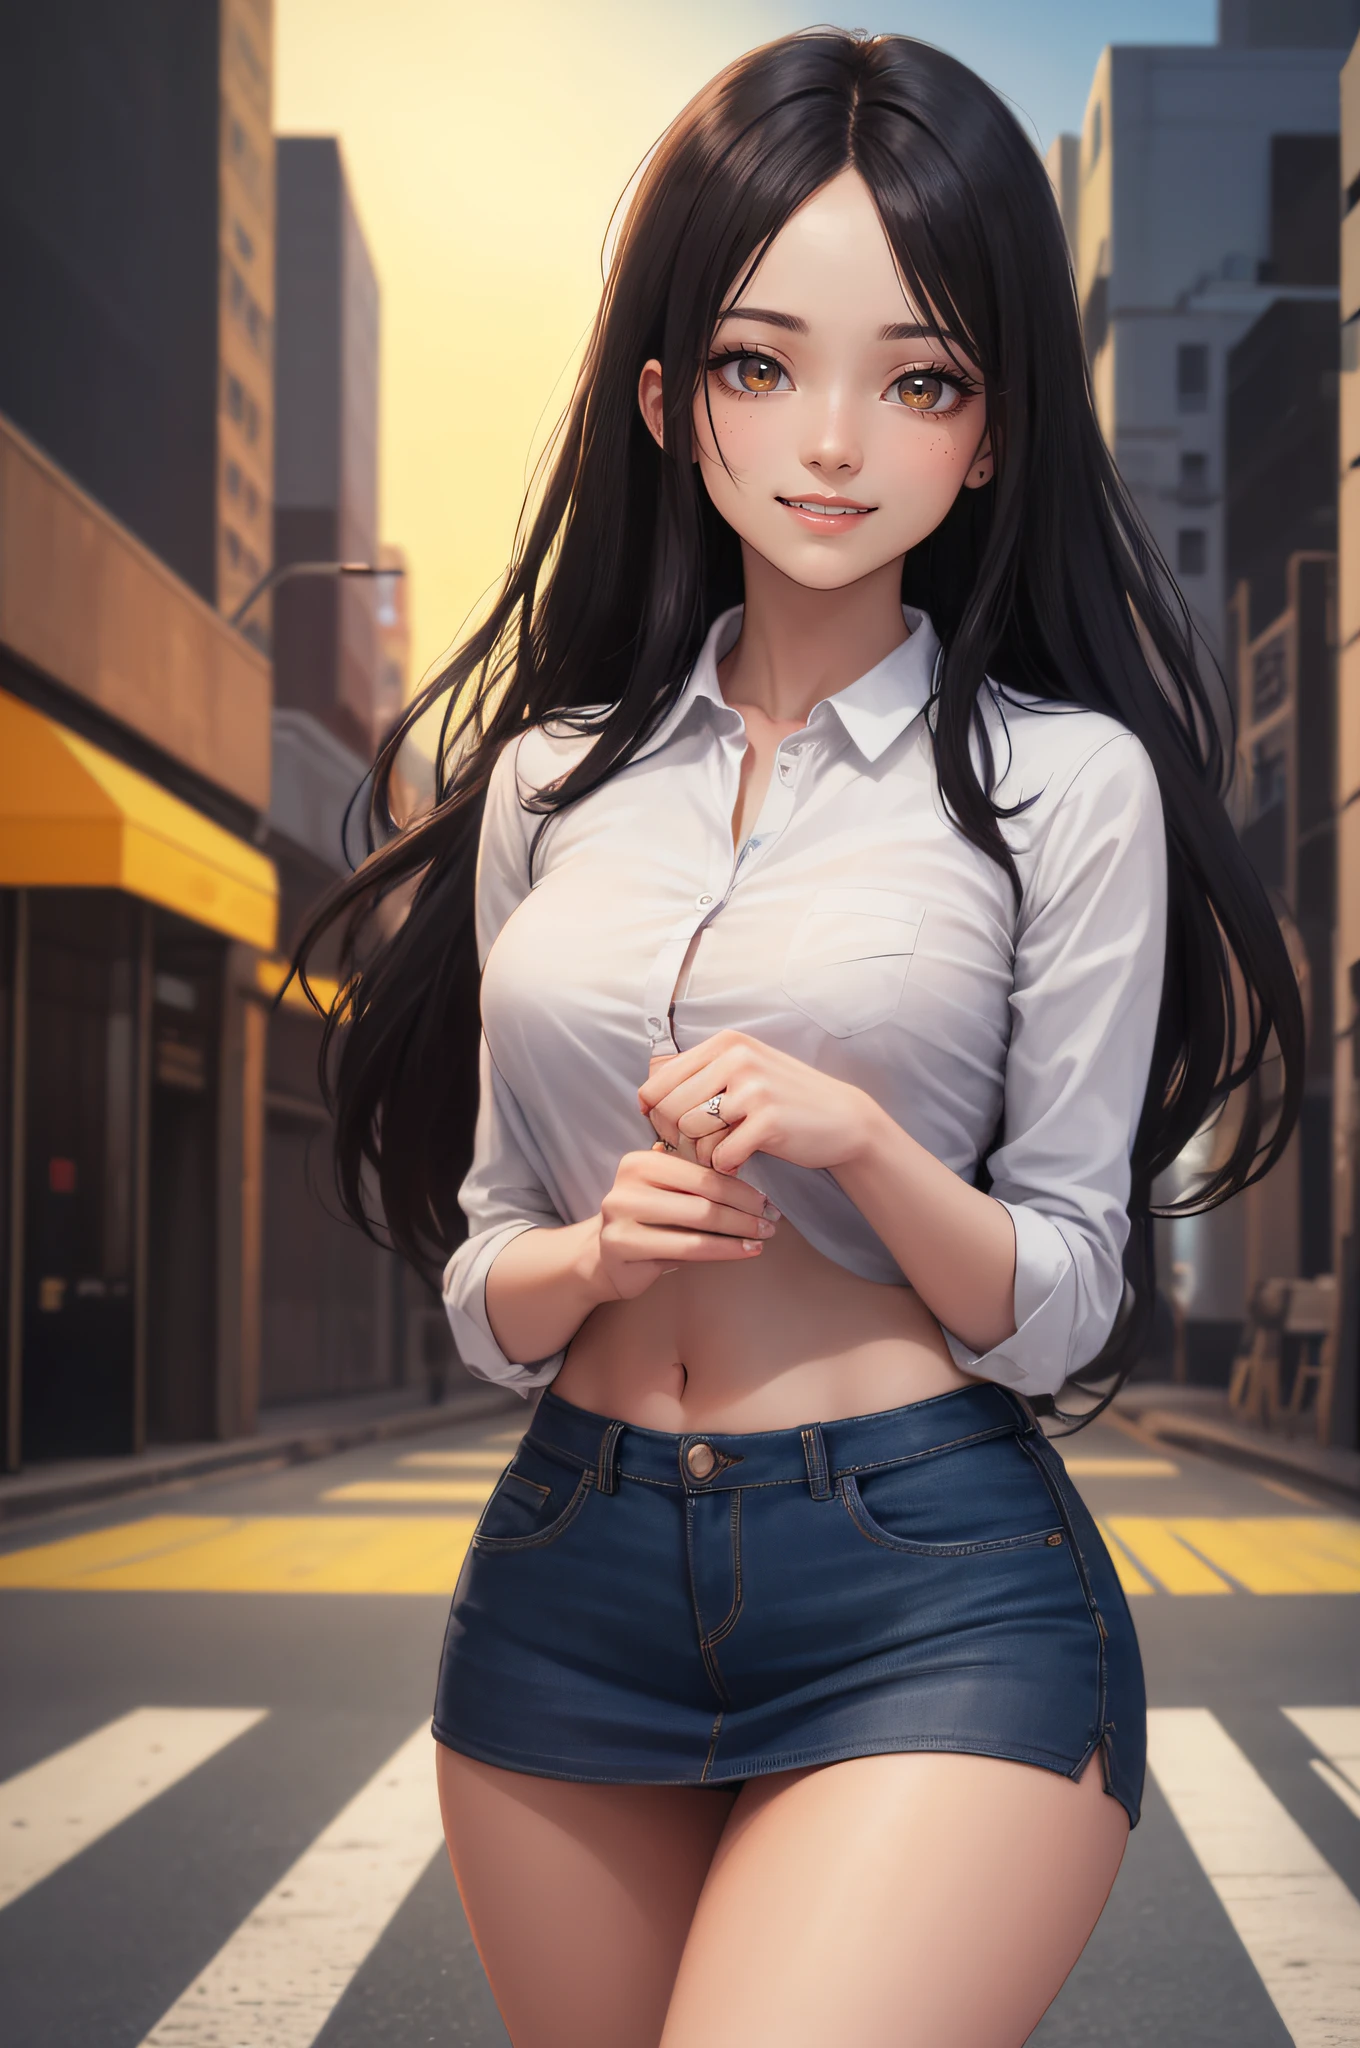 ((Currently, a cute and beautiful woman is changing her underwear)), ((22-year-old beauty)), ((embarrassed smile)), ((luscious long hair)), ((miniskirt)), (( Gradient Eyes)), ((Background is a city night view)), Attractive Makeup, Scenery, NFSW, UHD, Retina, Masterpiece, Accurate, Anatomical, Scientifically Correct, Textured Skin, Super Detail, High Detailed, High Quality, Award Winning, Top Quality, High Definition, 1080P, HD, 4K, 8k, 16k